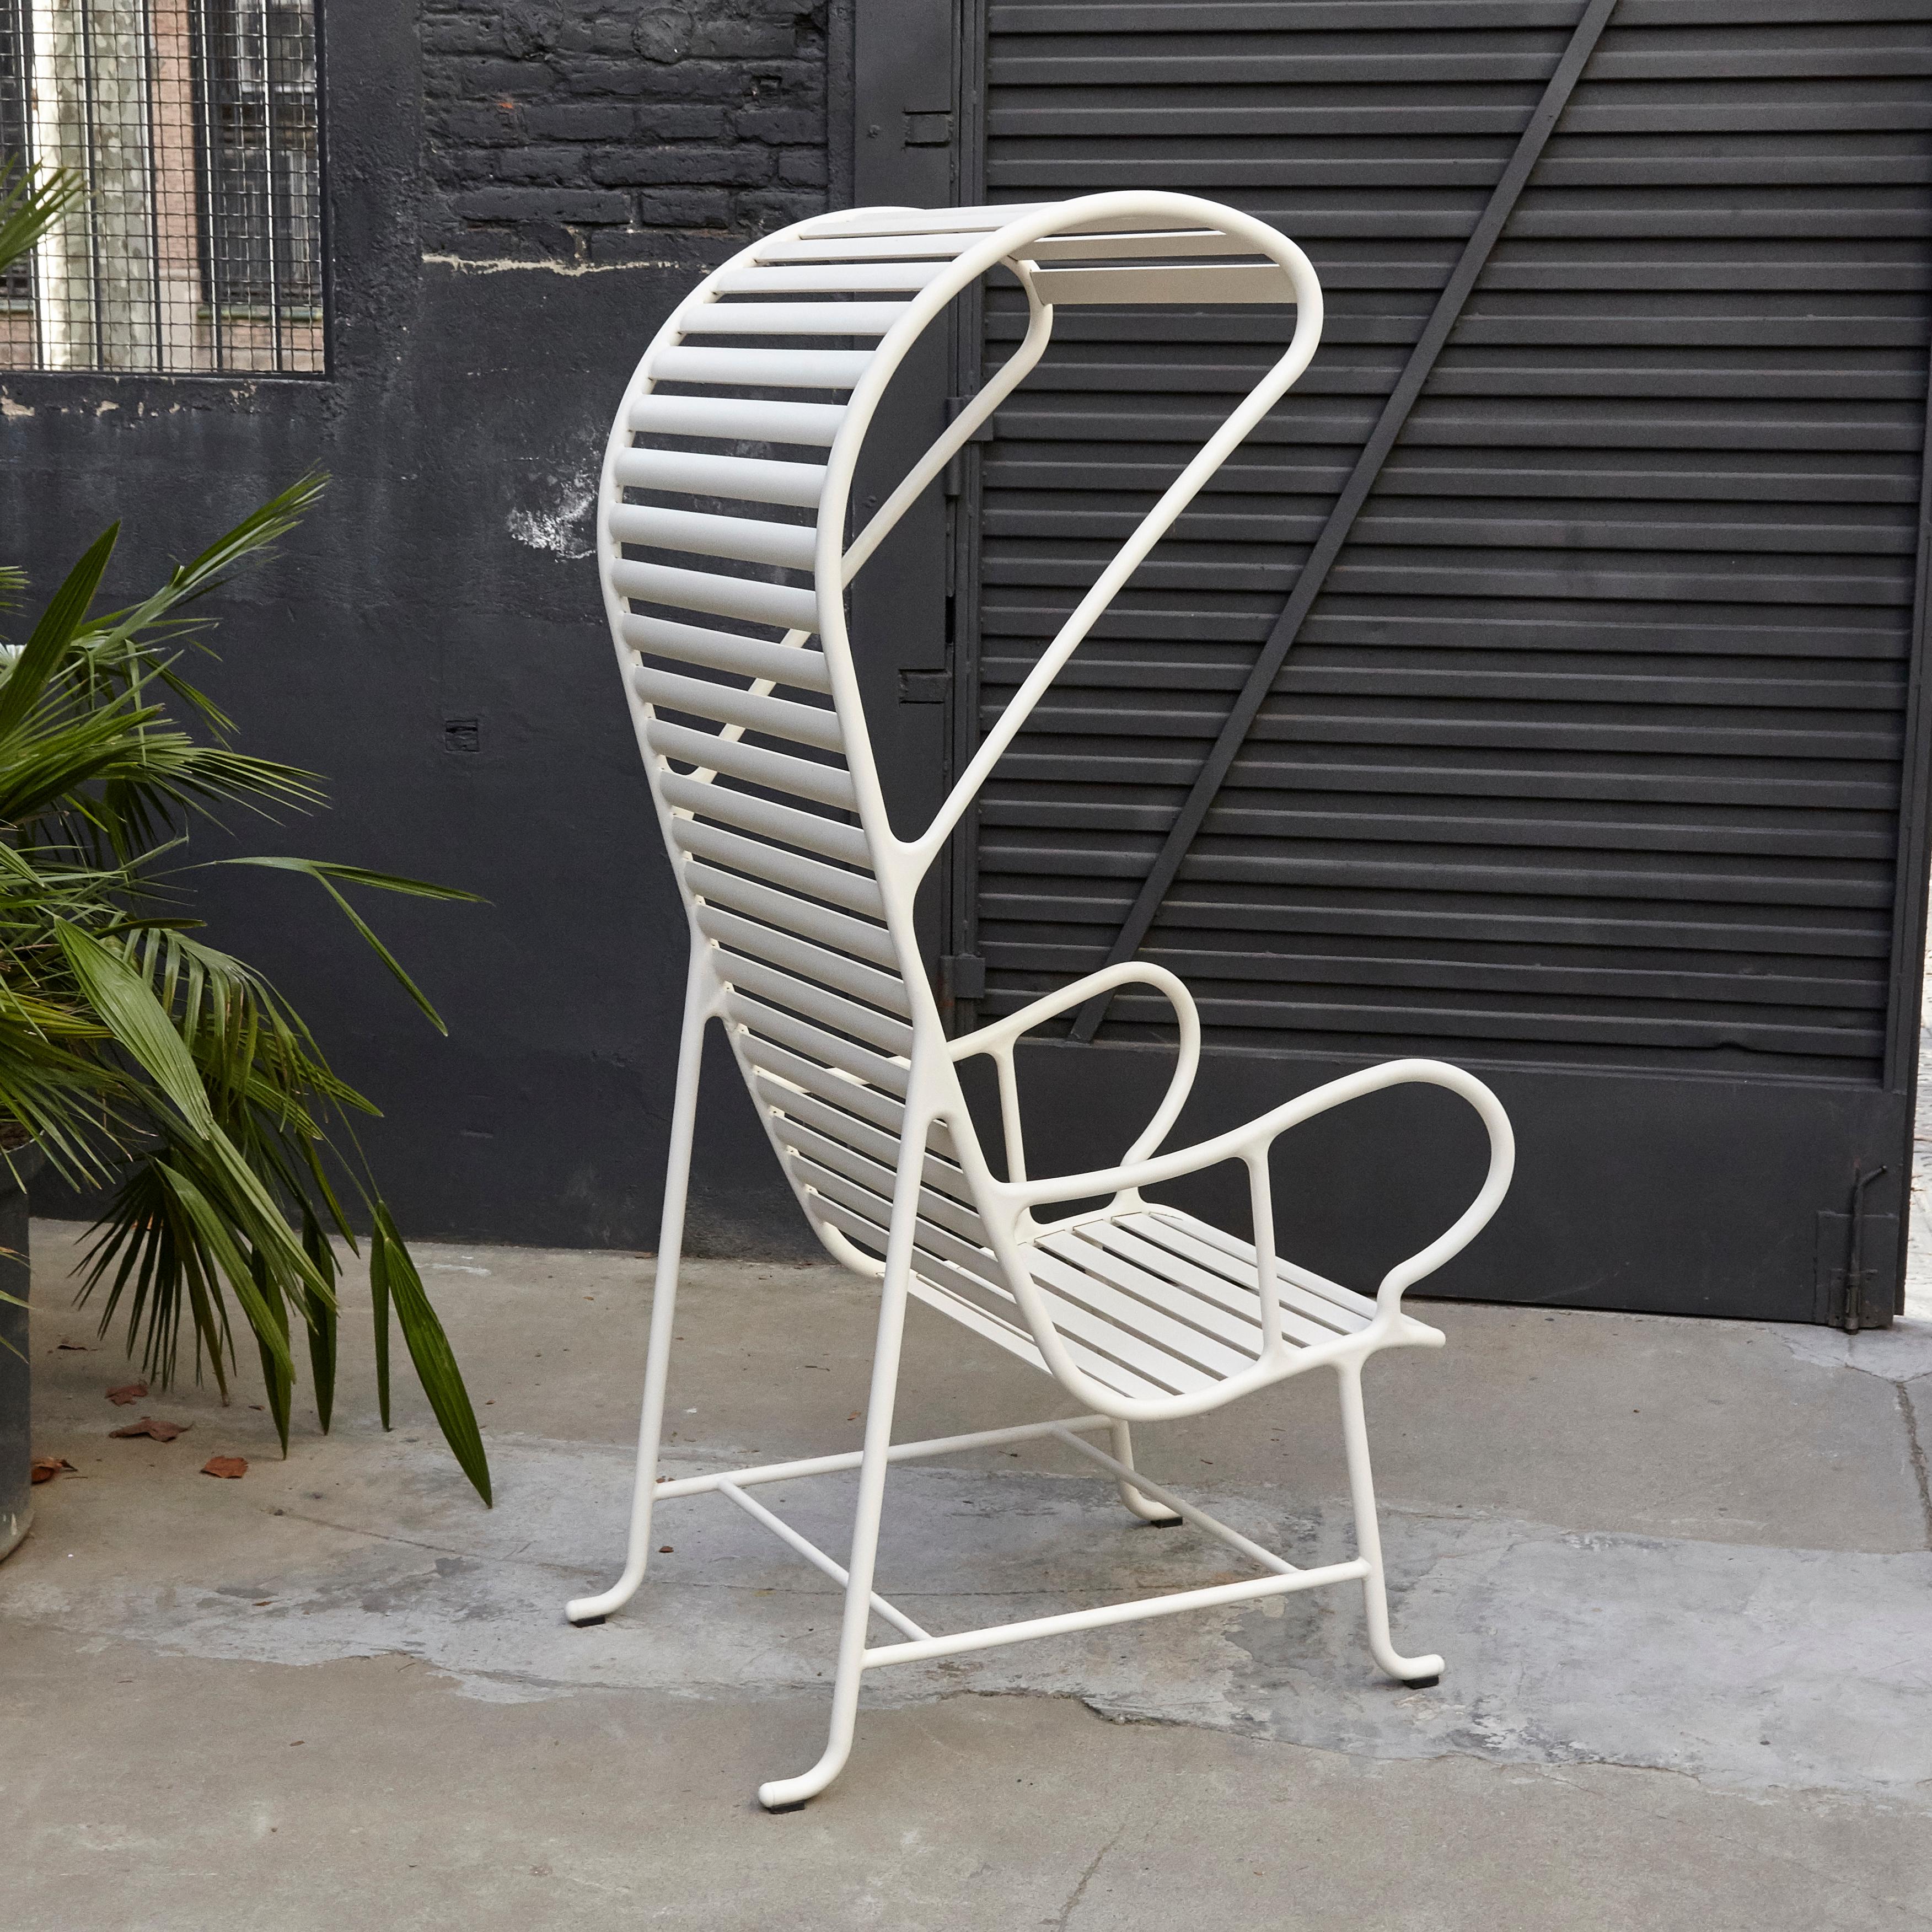 Painted Jaime Hayon Contemporary White Gardenias Outdoor Armchair with Pergola For Sale